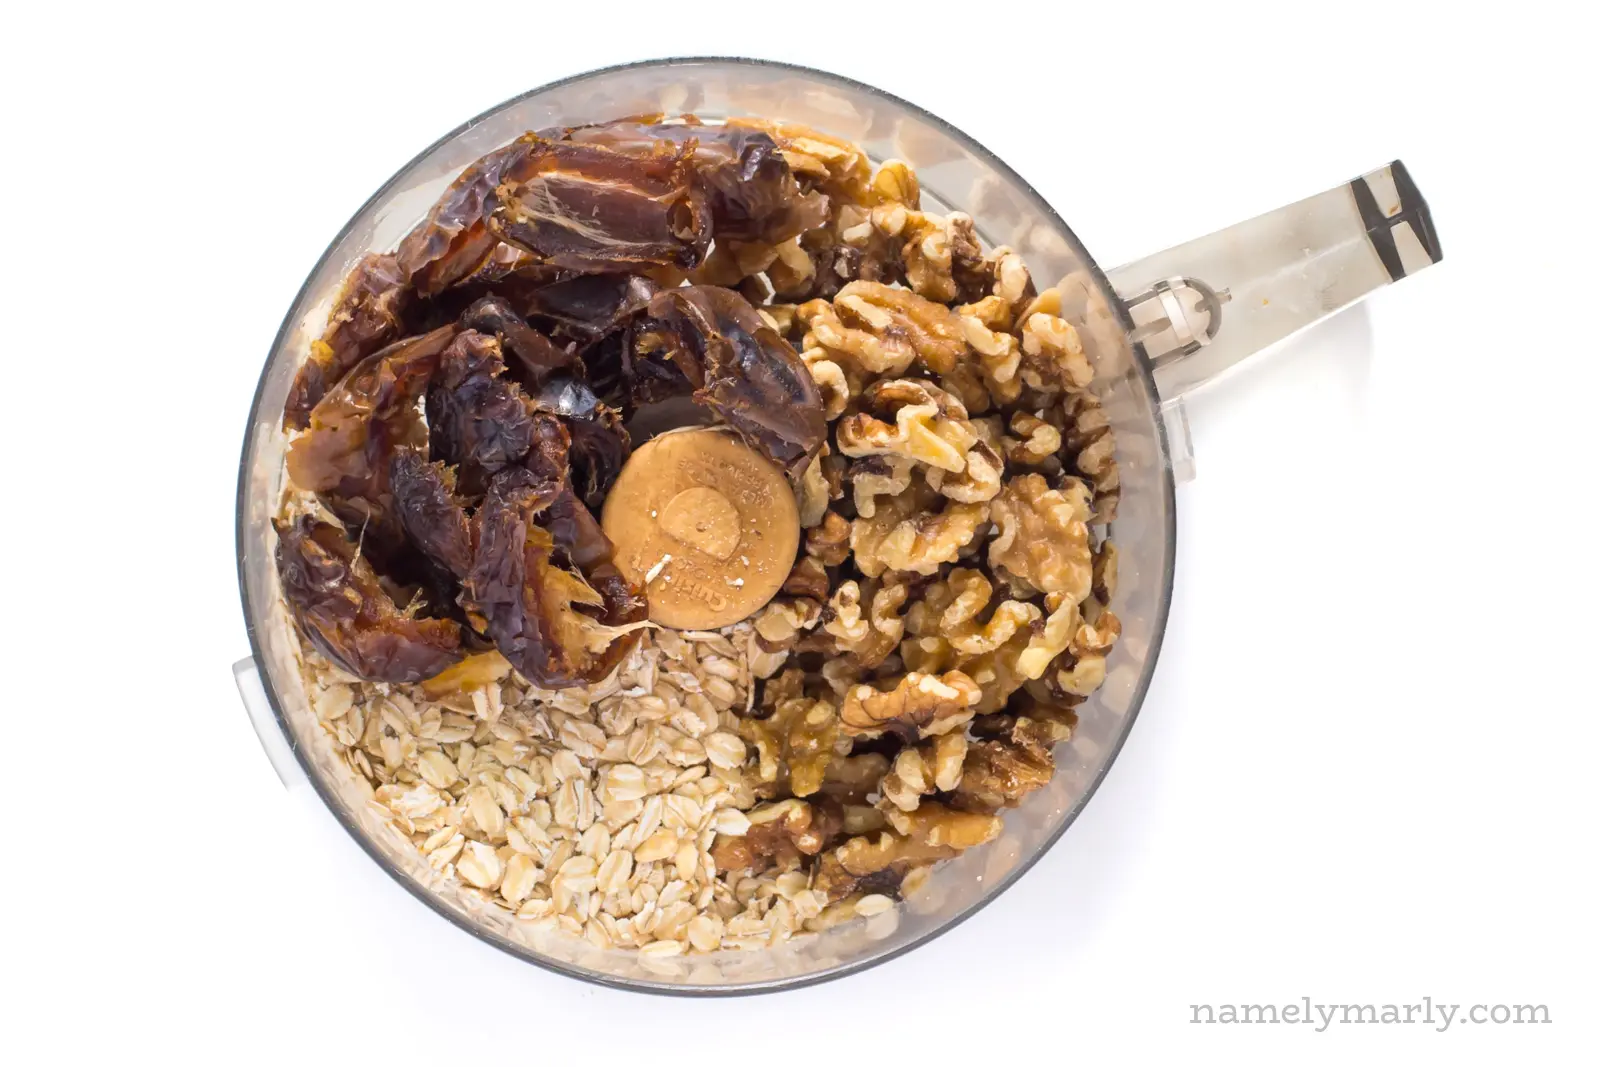 Oatmeal, dates, and walnuts in a food processor bowl.